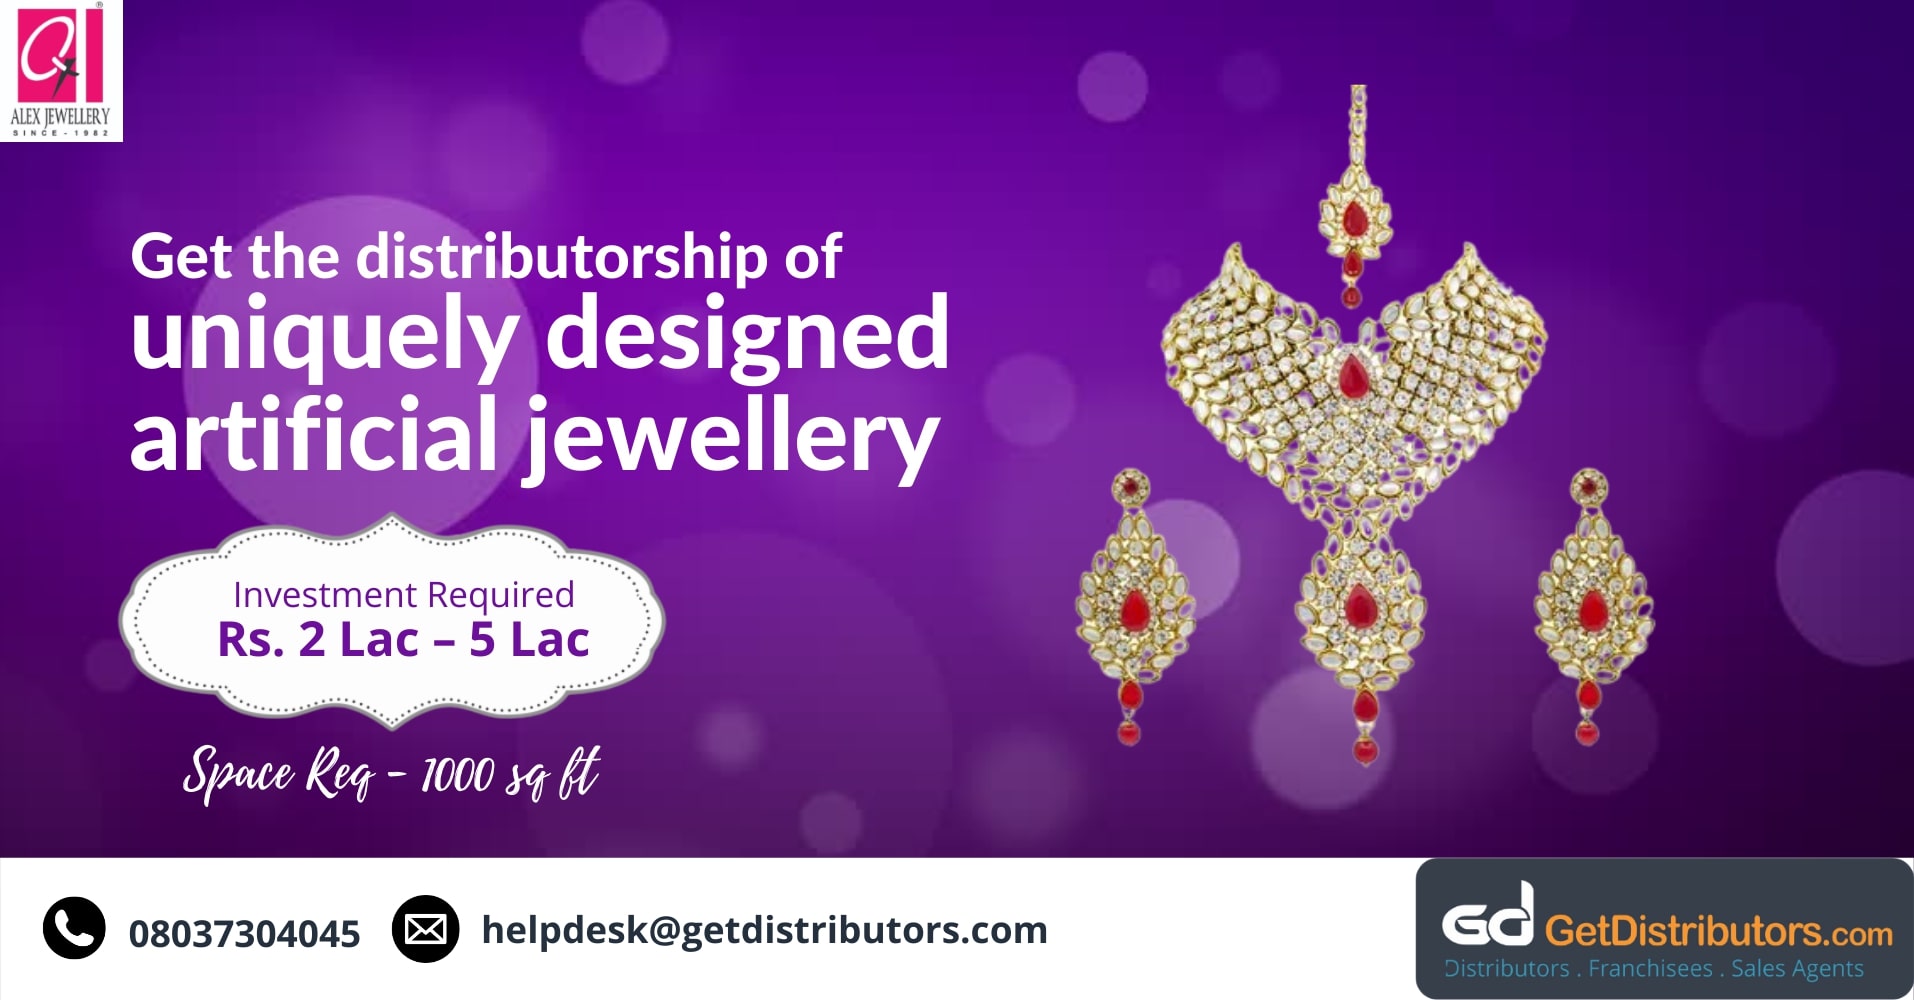 Exquisite jewelry for distribution